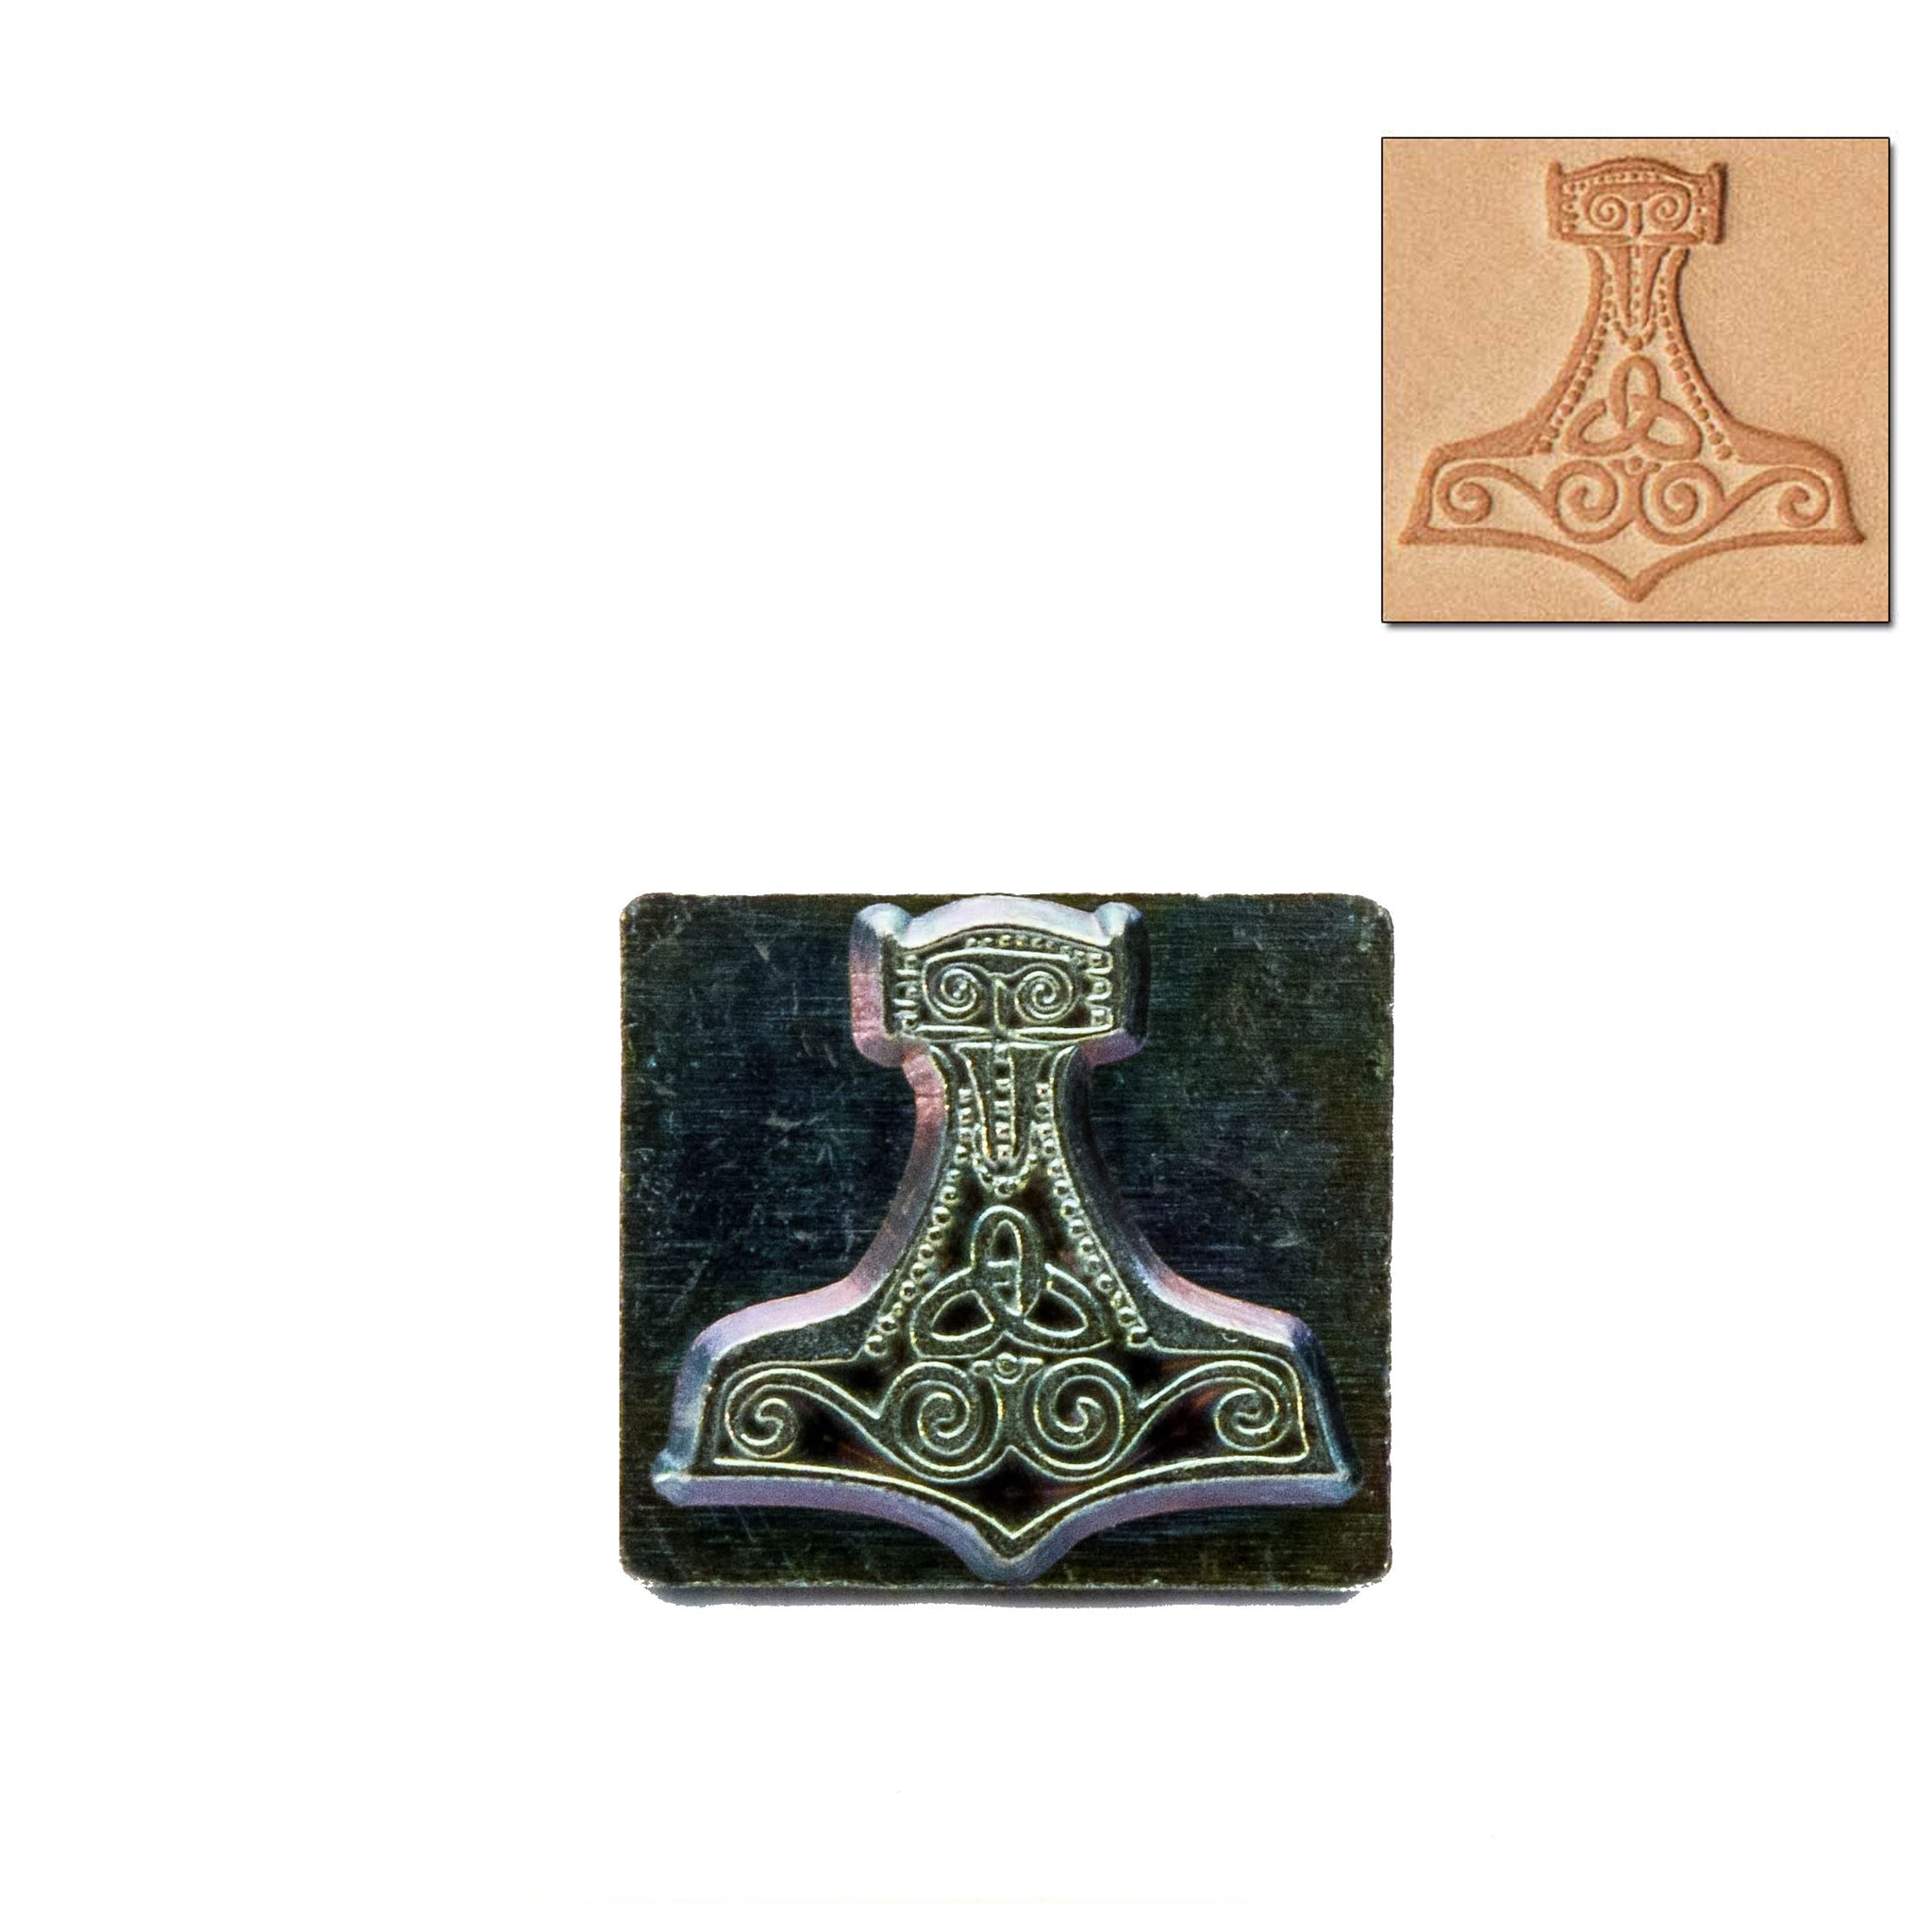 Thor's Hammer/Mjolnir 3D Embossing Stamp from Identity Leathercraft